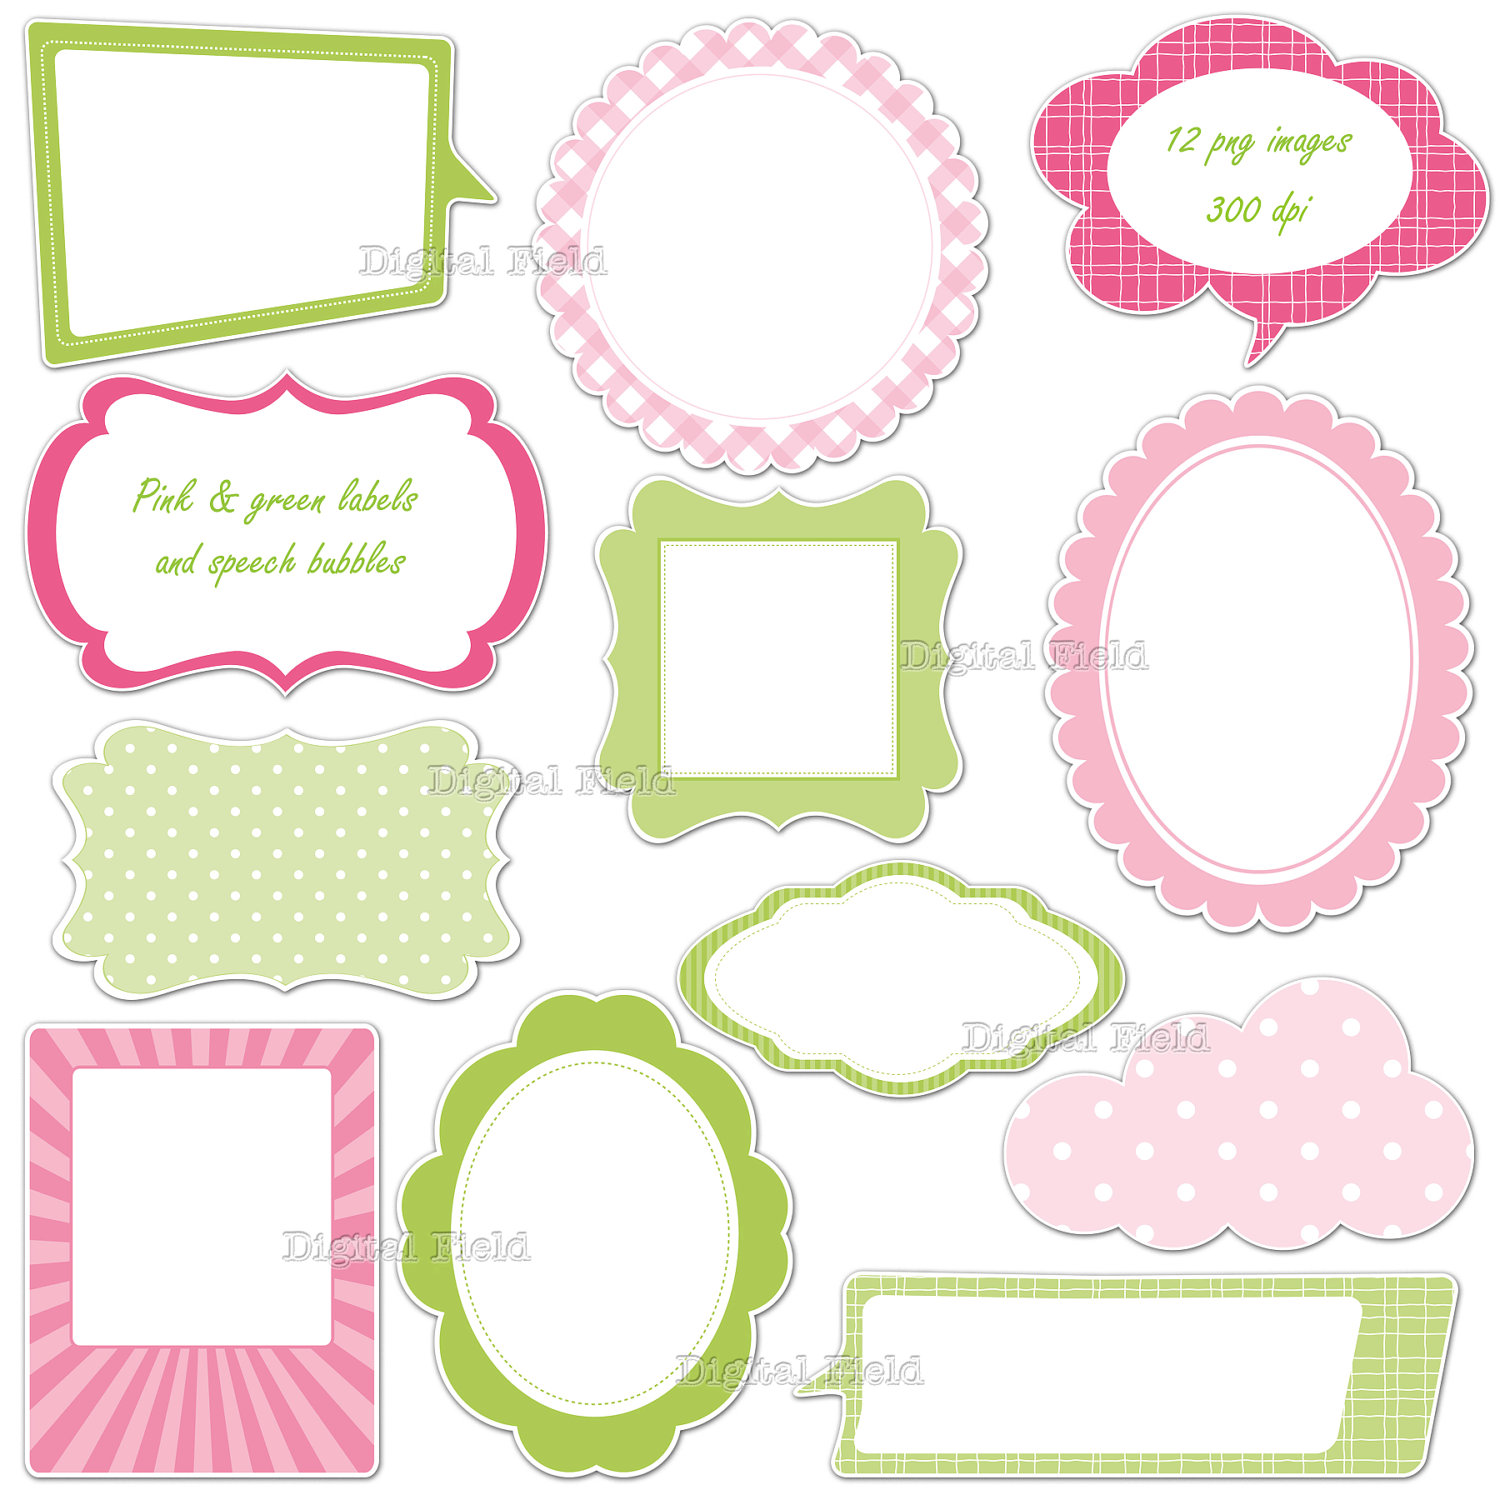 Popular items for bubbles clip art on Etsy